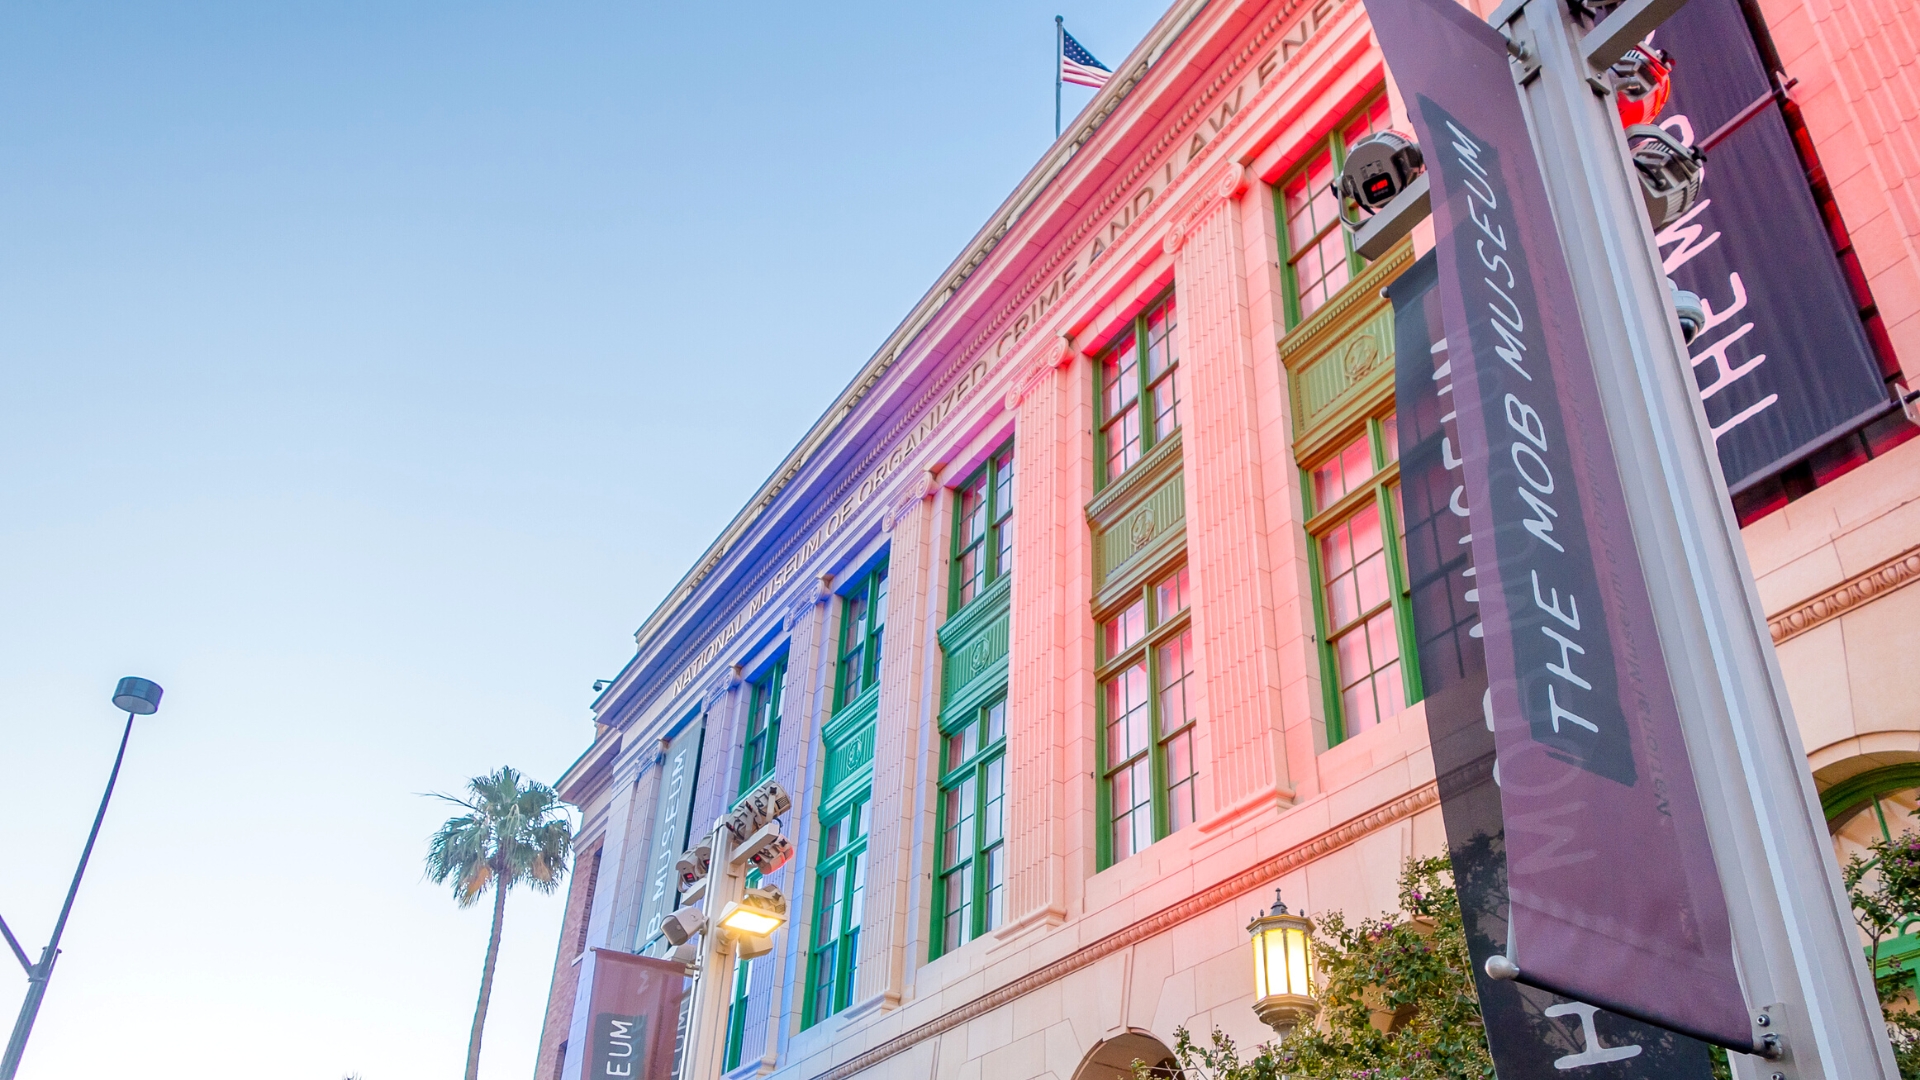 Best Museums in Las Vegas to Explore Beyond the Glitz and Glamour